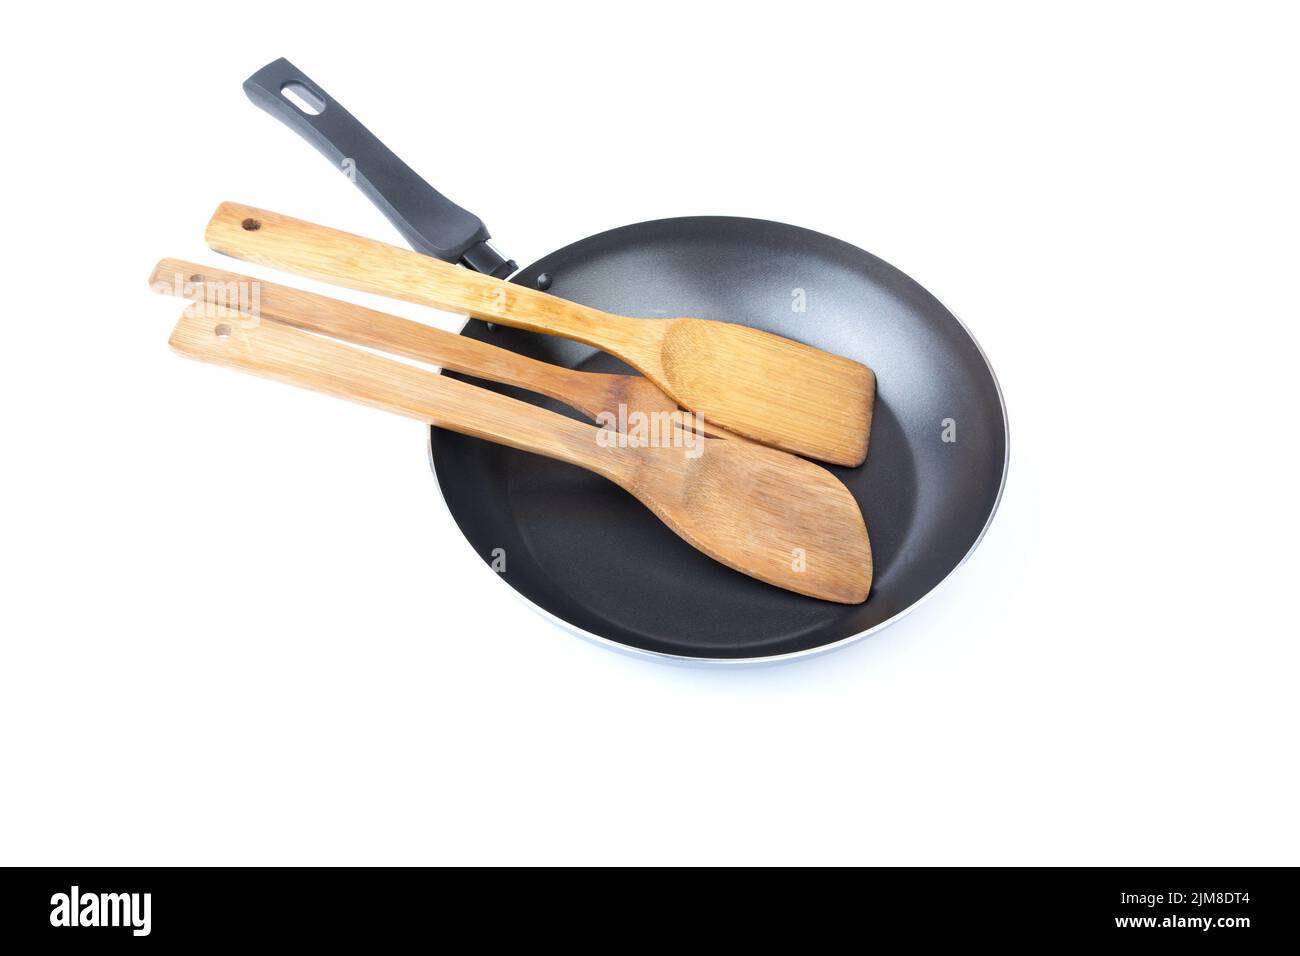 Wooden kitchen shovel in a frying pan Stock Photo